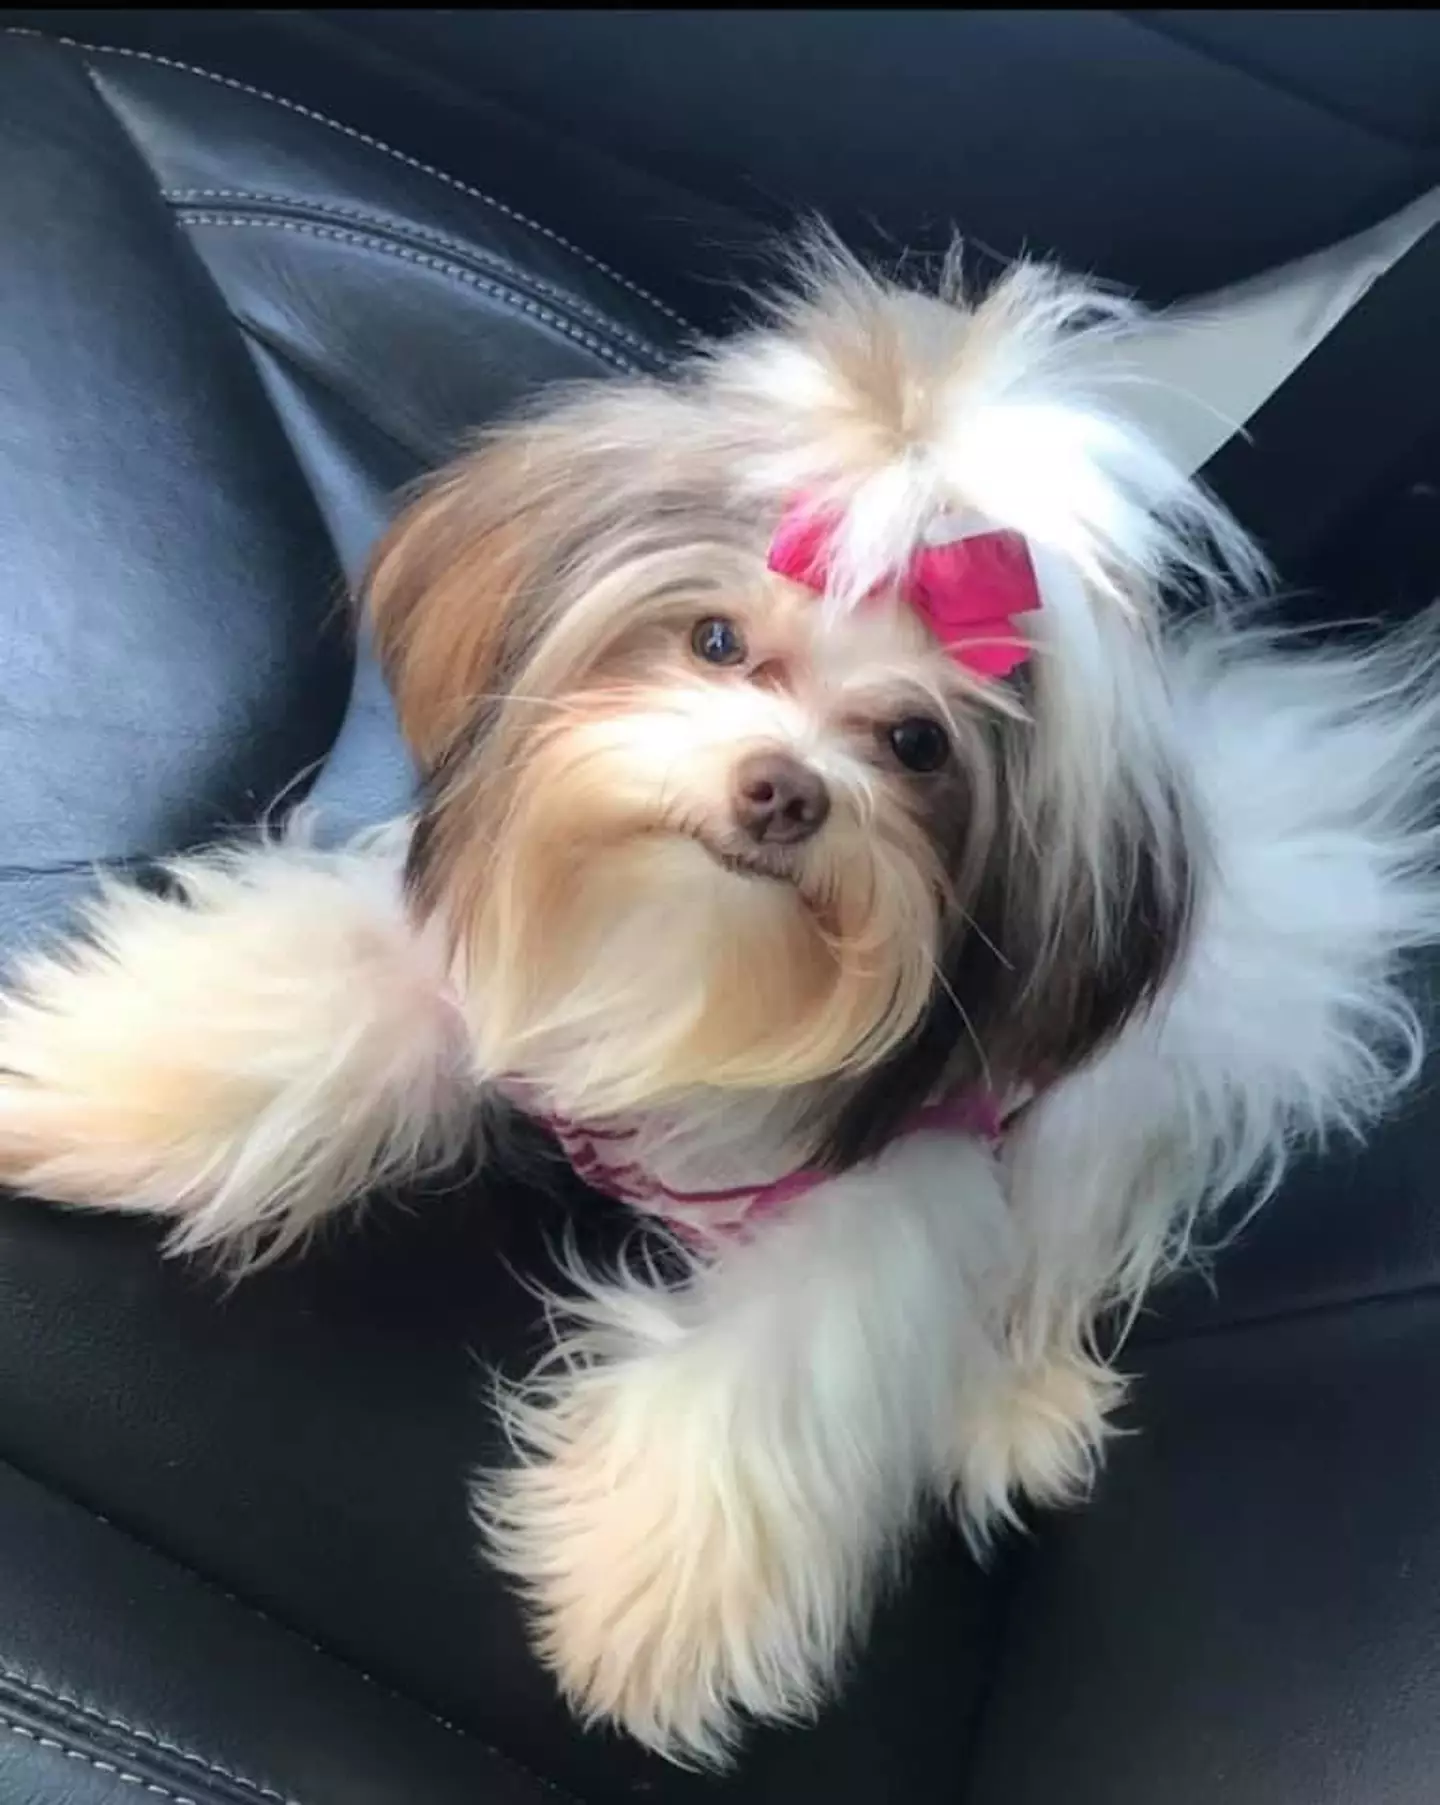 The dog was looking all cute before she headed to the groomers.